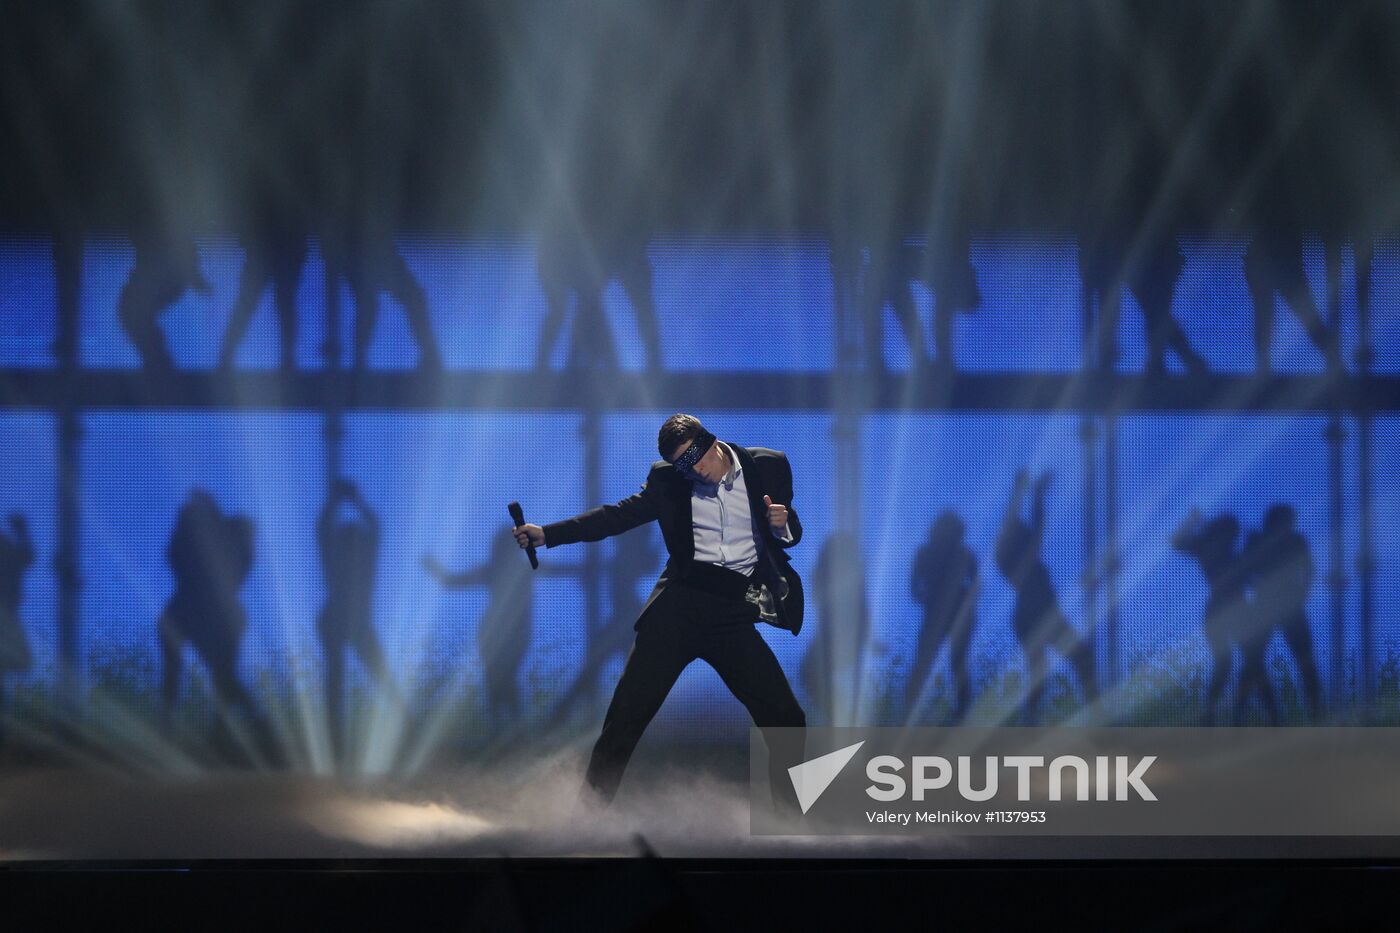 Eurovision Song Contest 2012: Grand Final